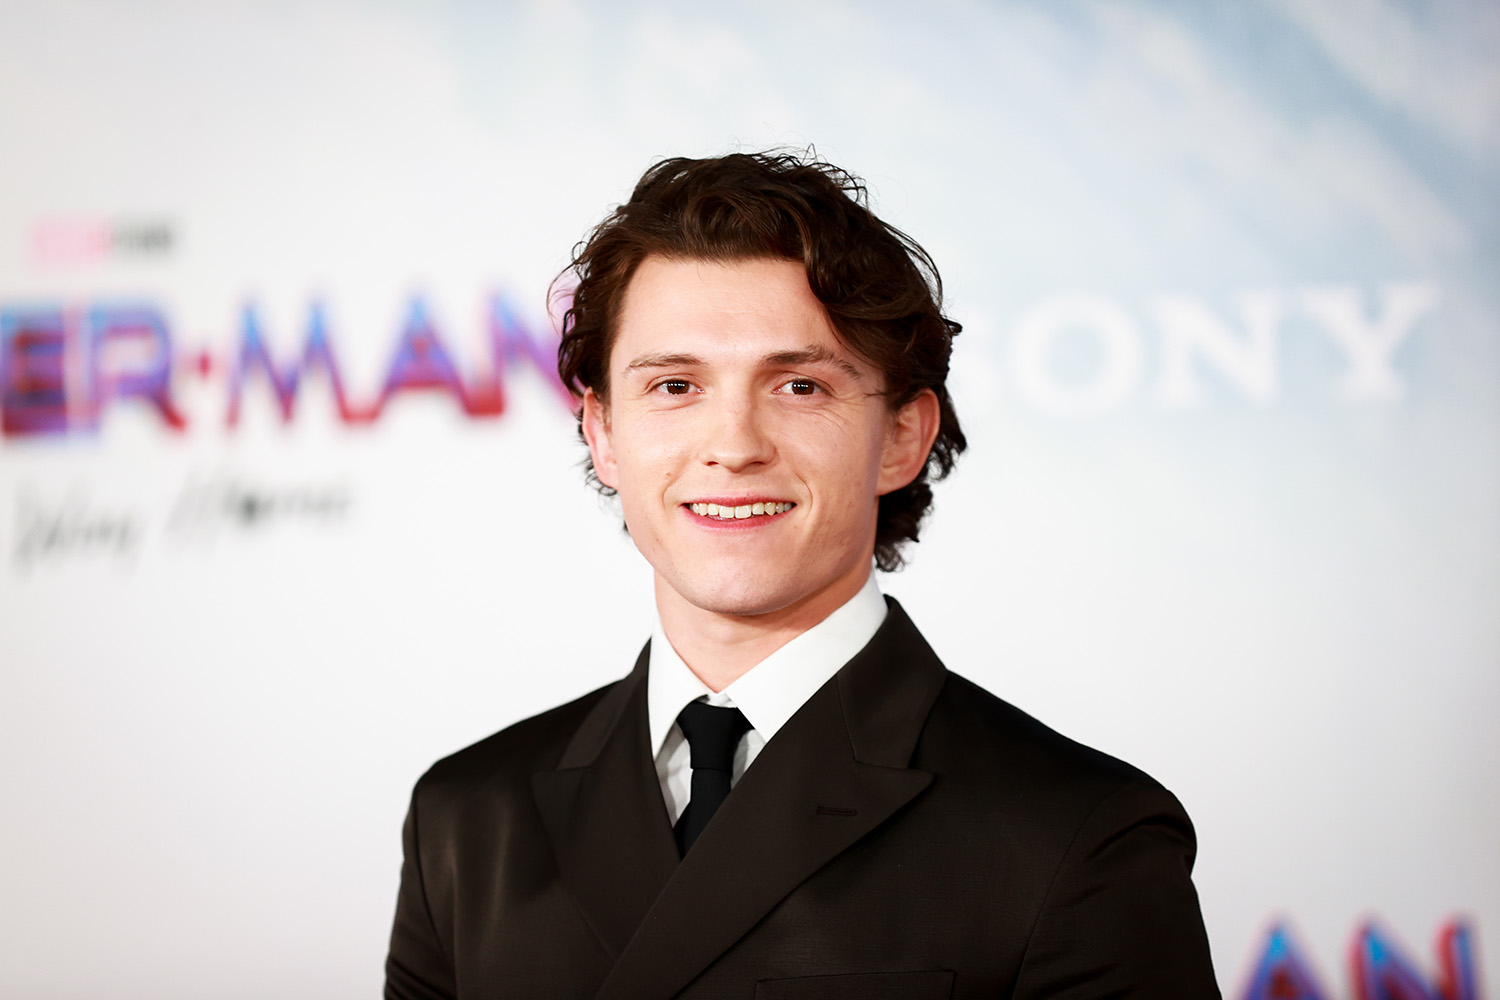 Tom Holland attends the Spider-Man: No Way Home premiere in Los Angeles